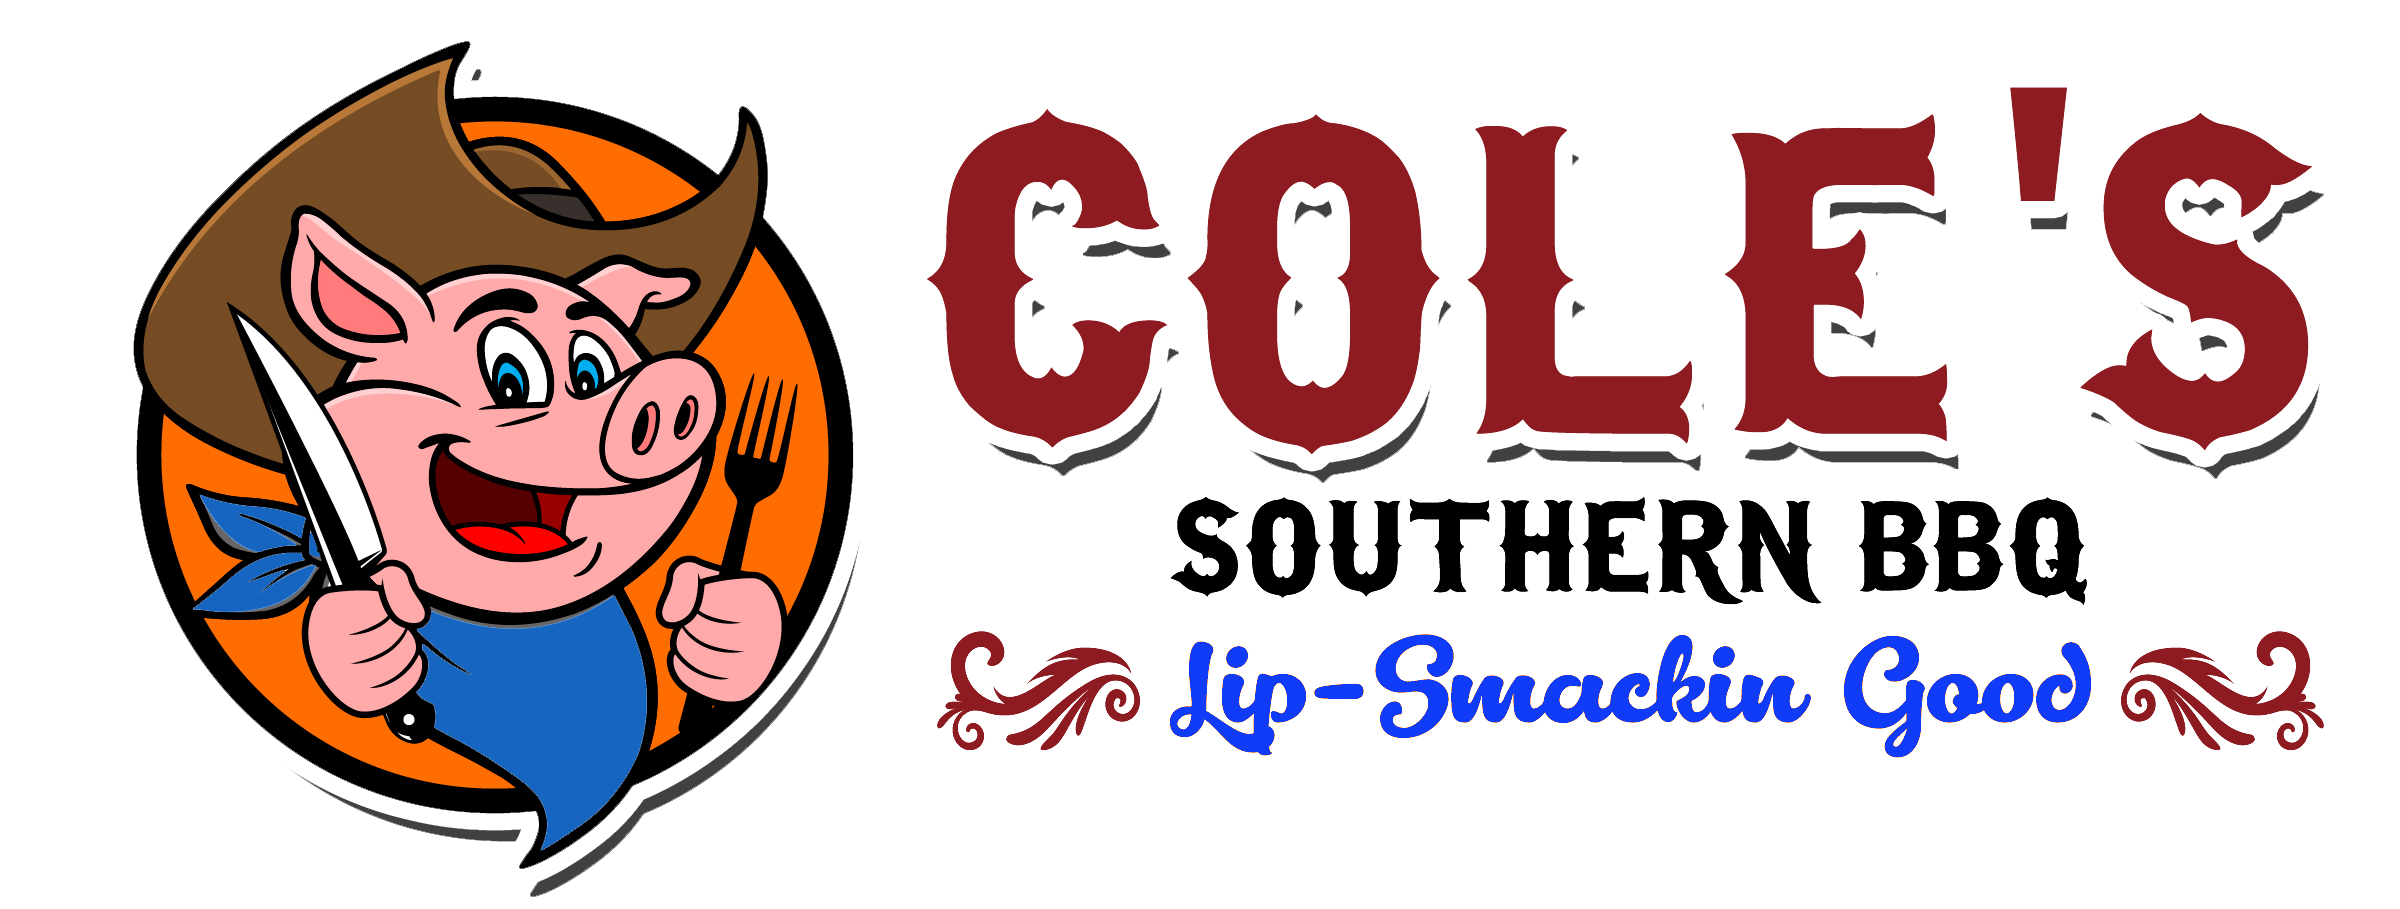 Cole's Southern BBQ